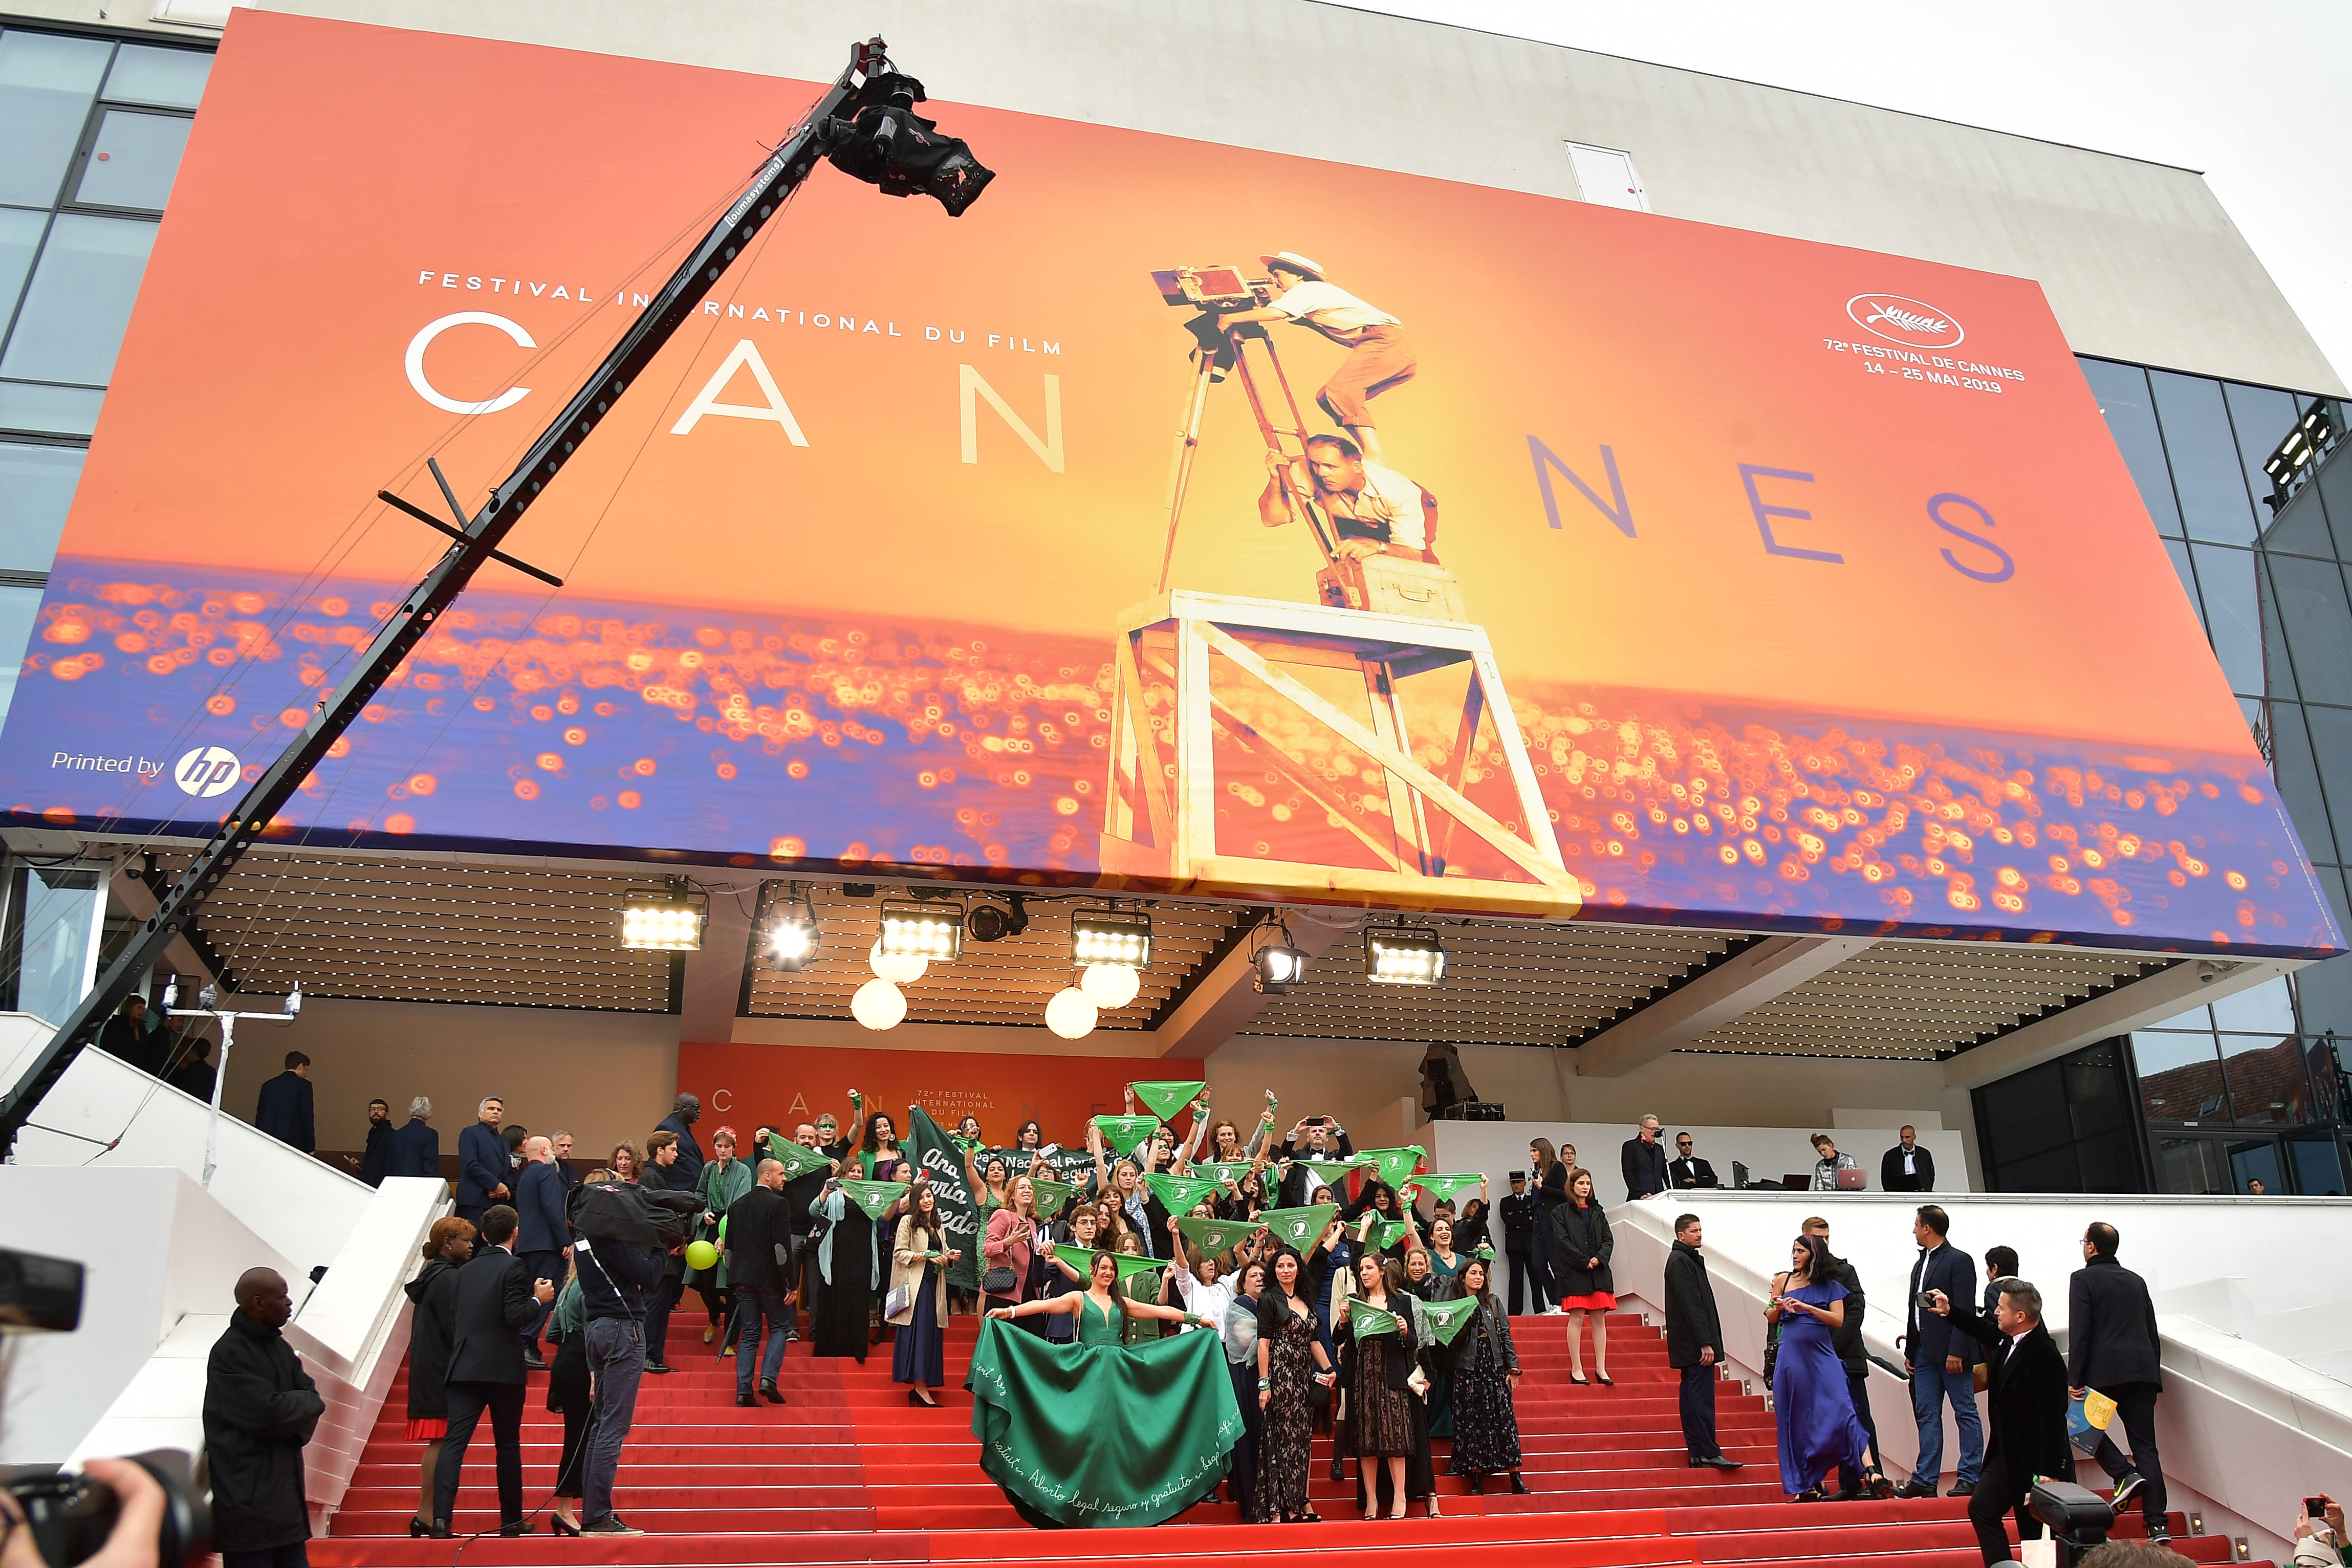 Cannes Film Festival Workers Going Ahead With Strike Action Over Pay Dispute